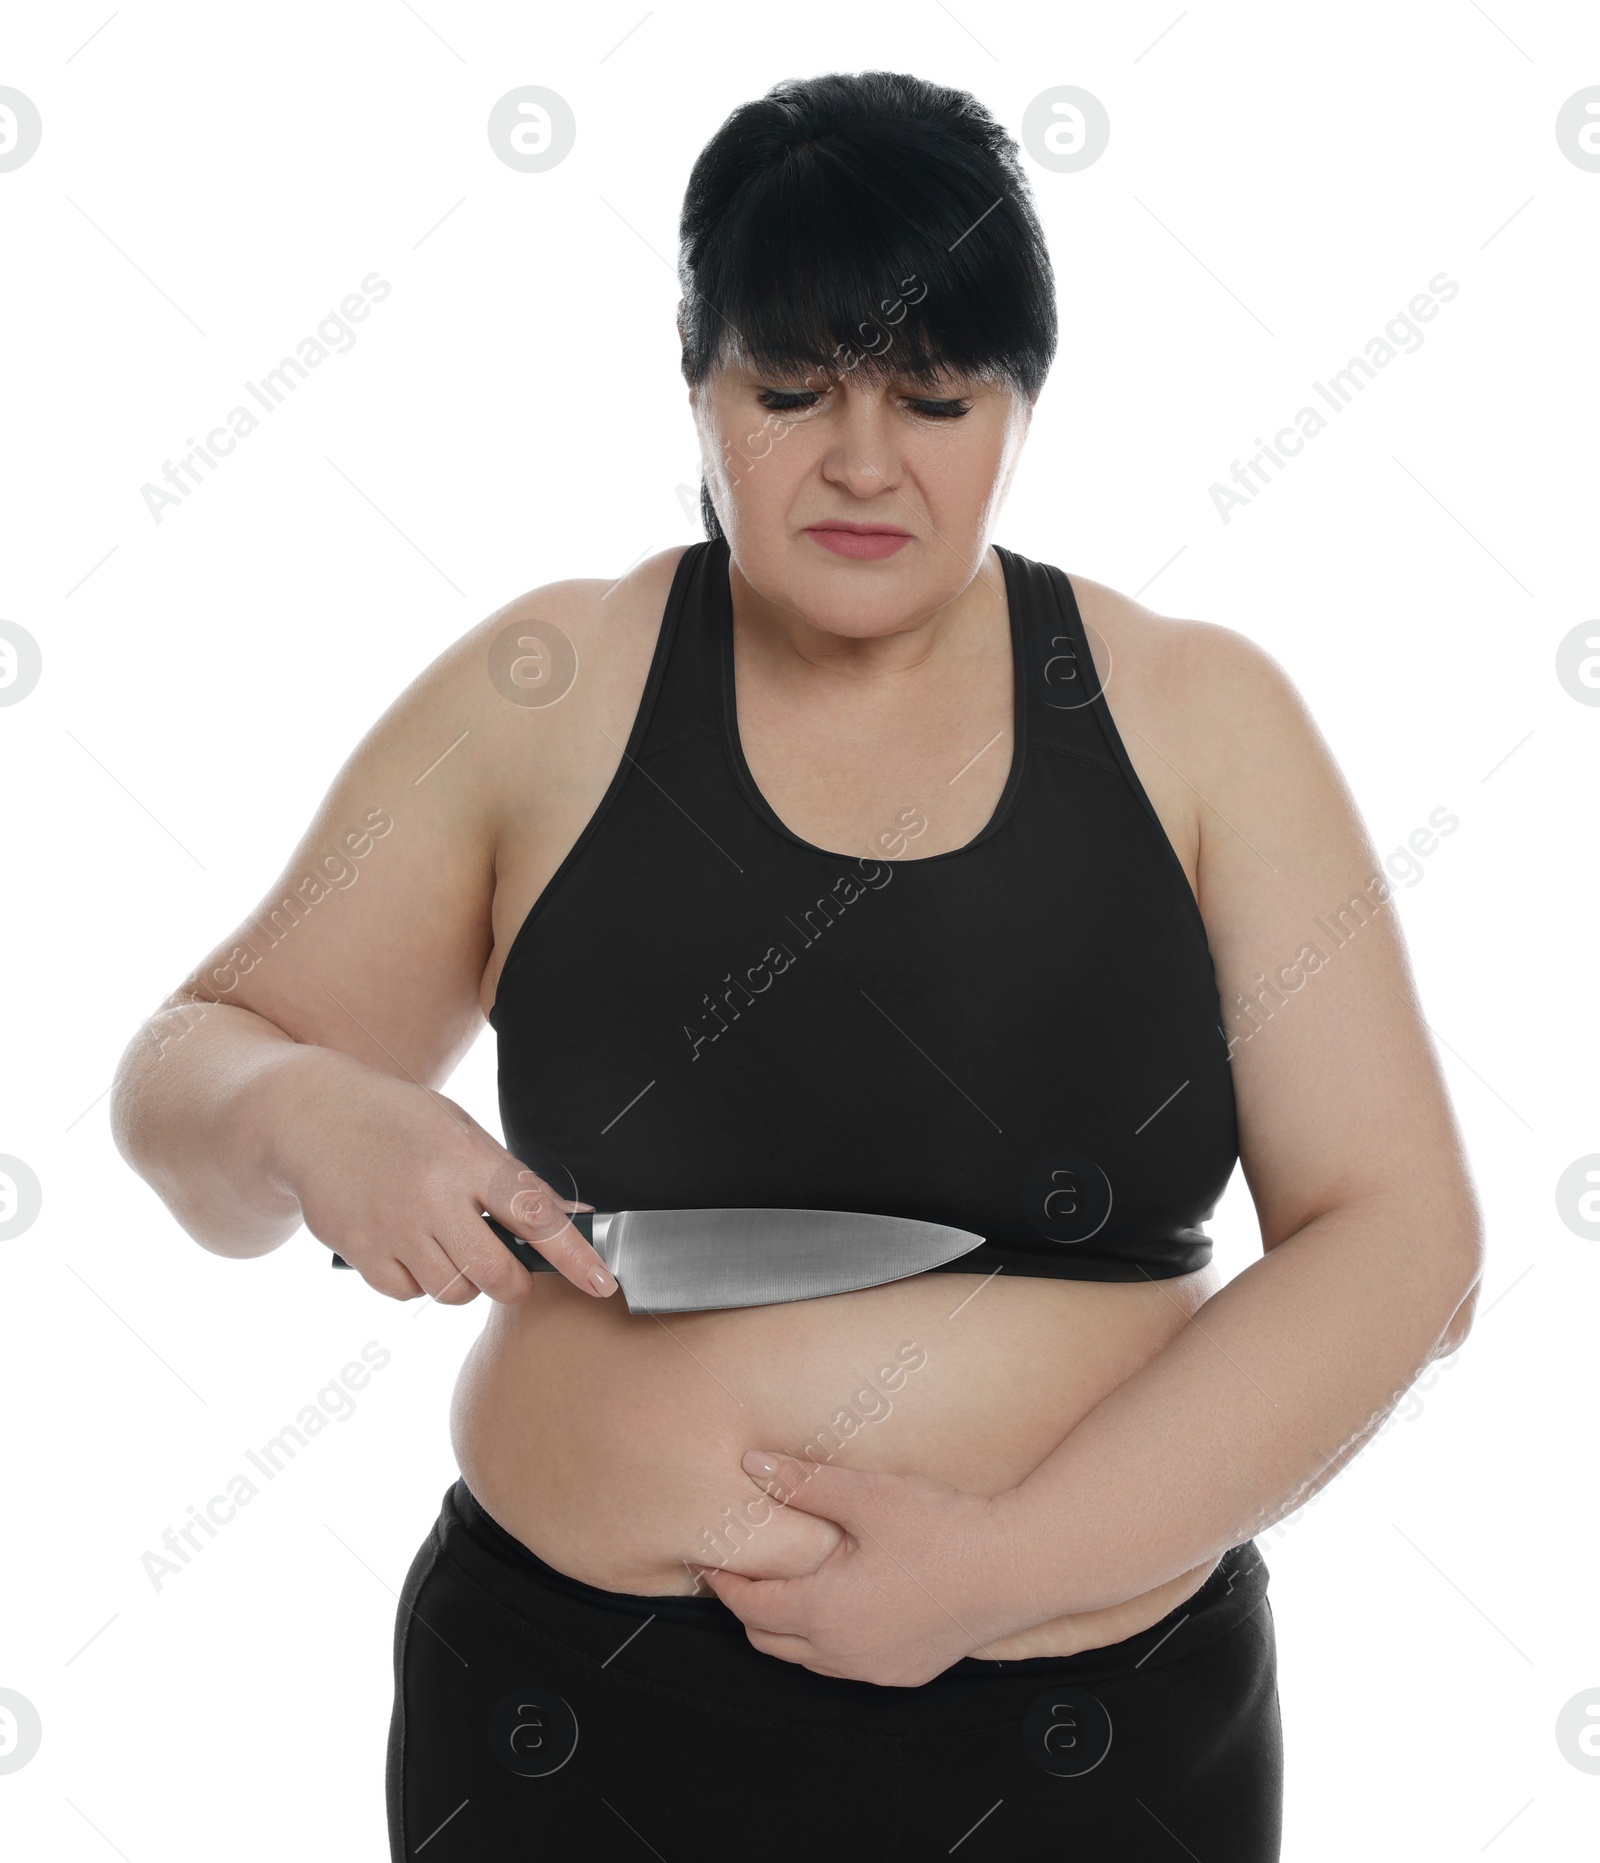 Photo of Obese woman with knife on white background. Weight loss surgery